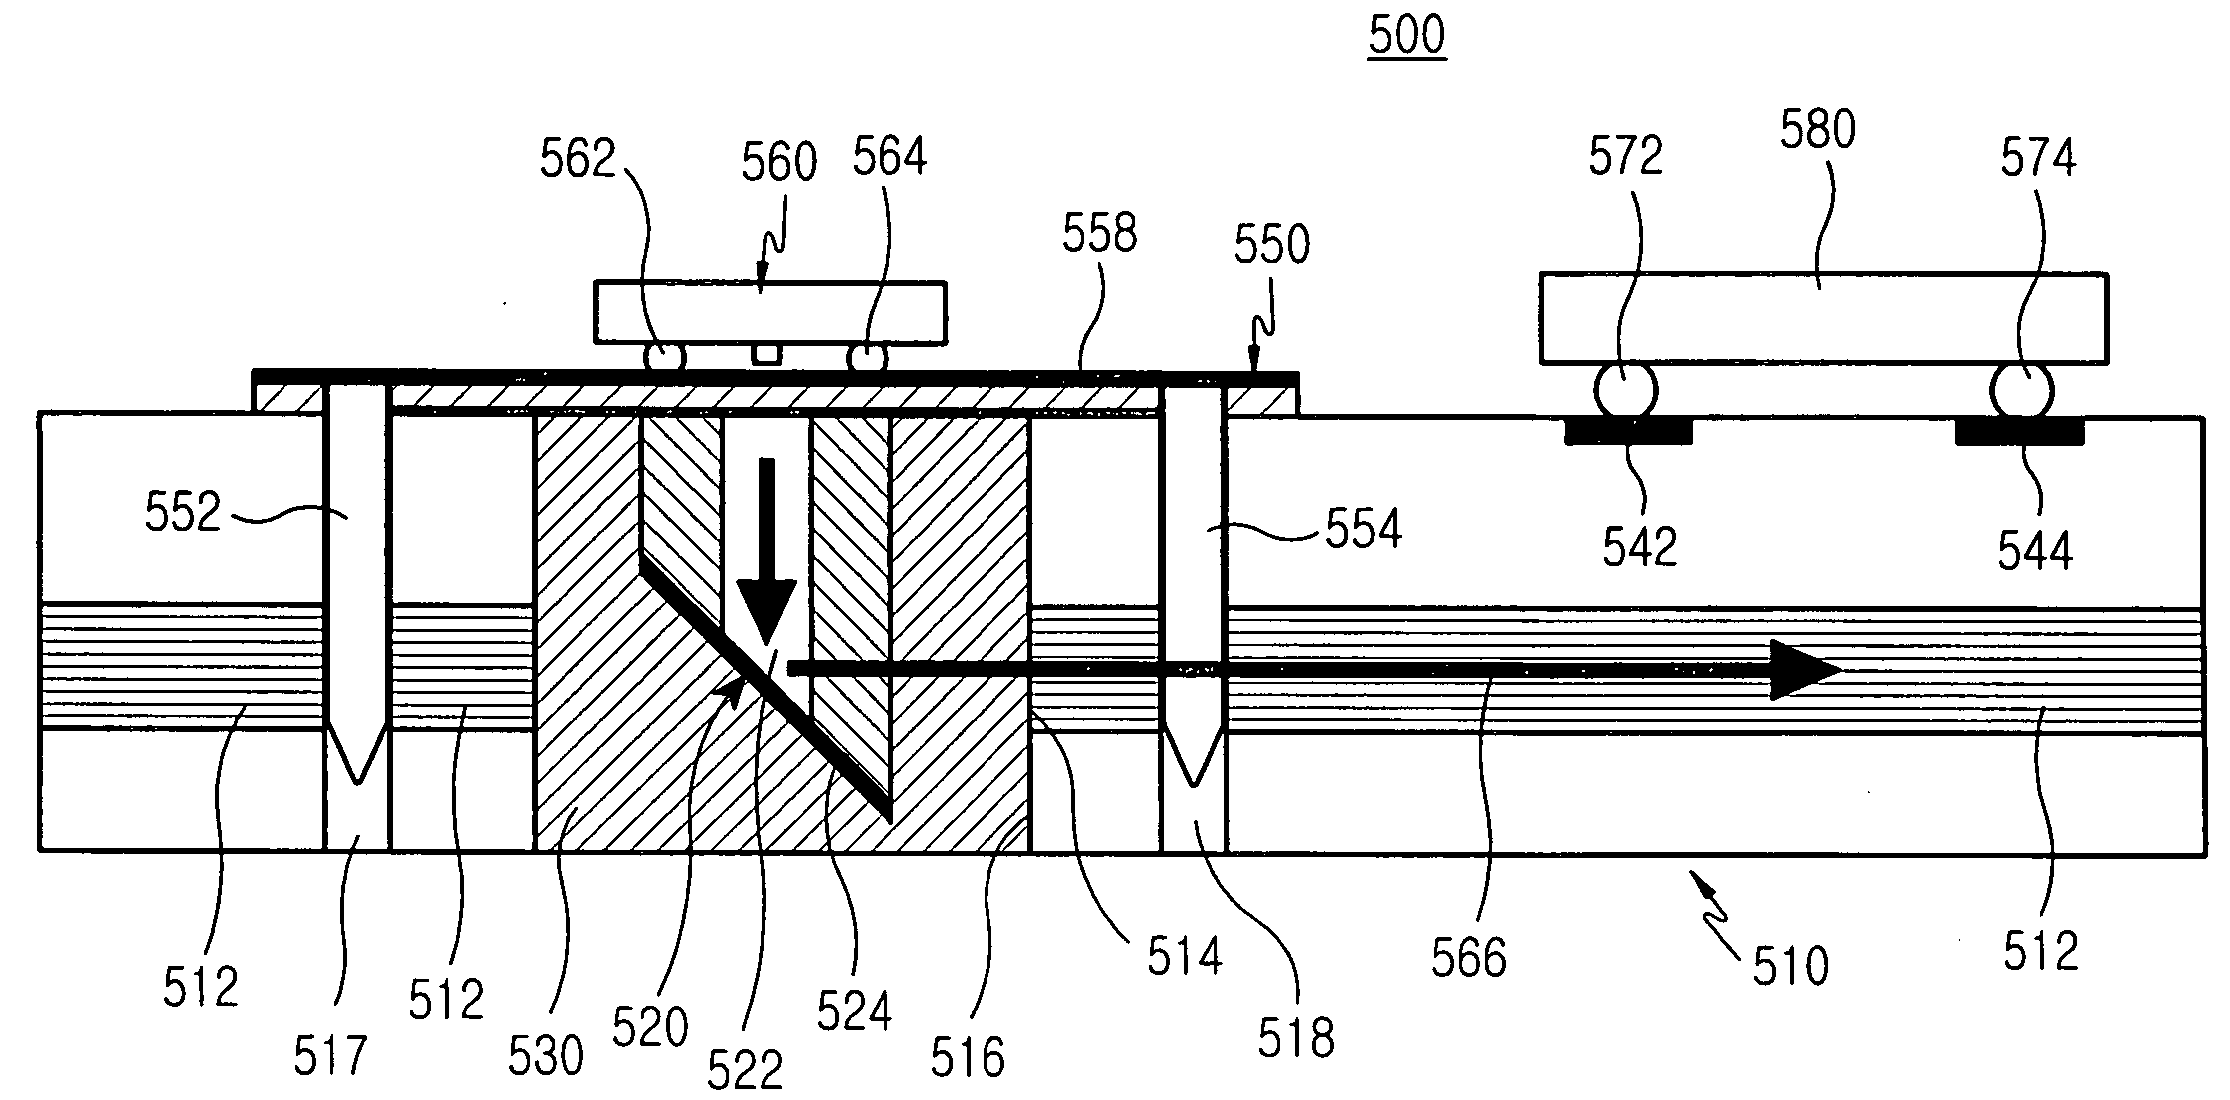 Packaging apparatus for optical interconnection on optical printed circuit board